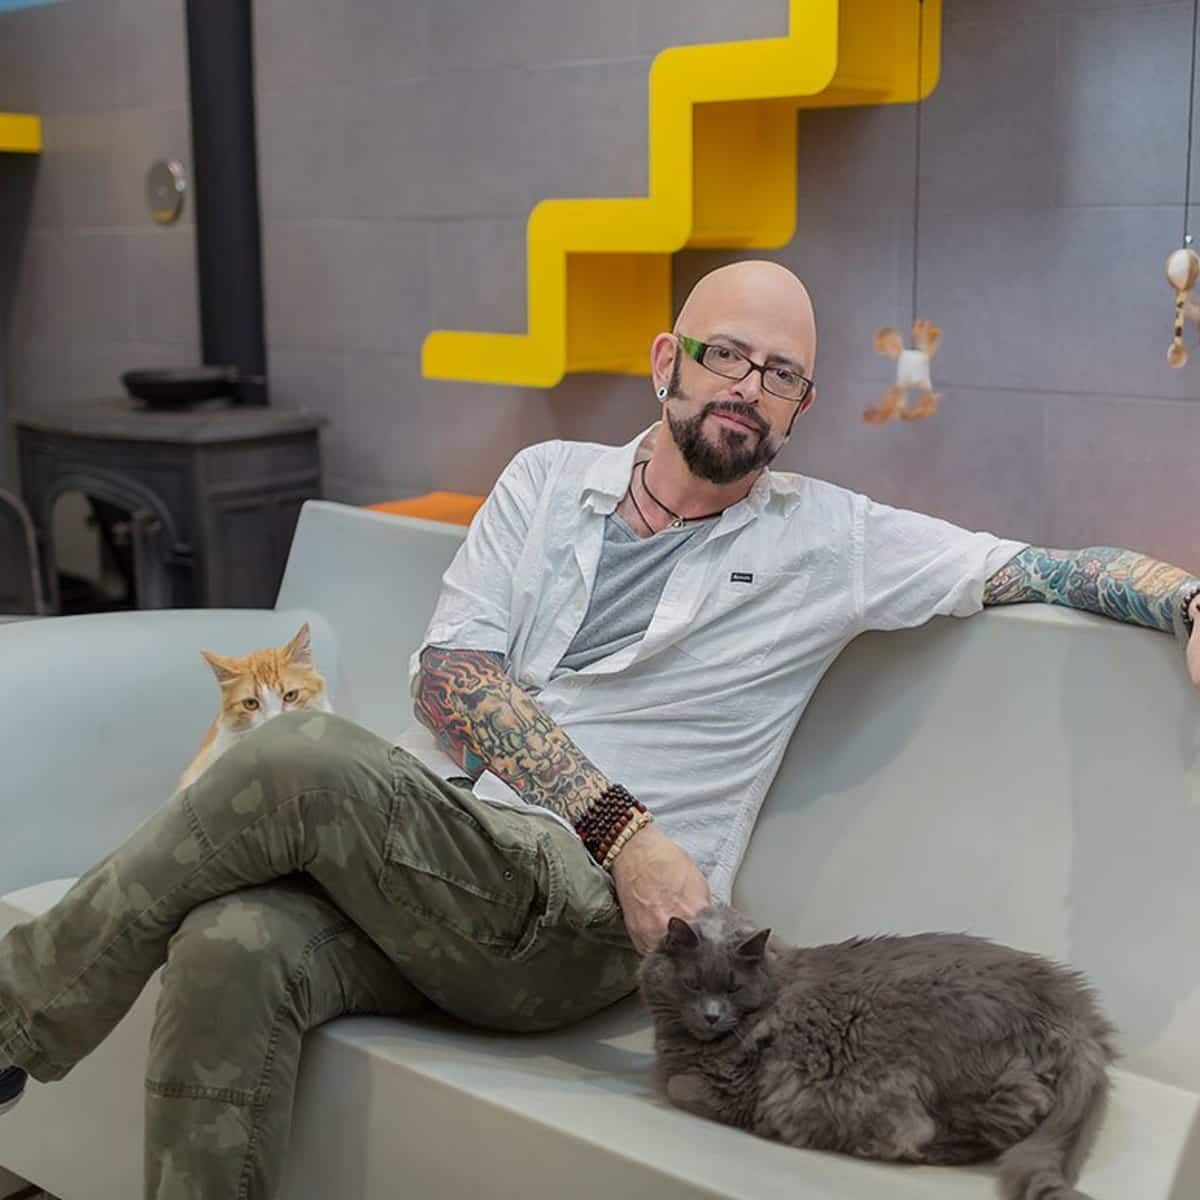 Image of Jackson Galaxy after losing weight